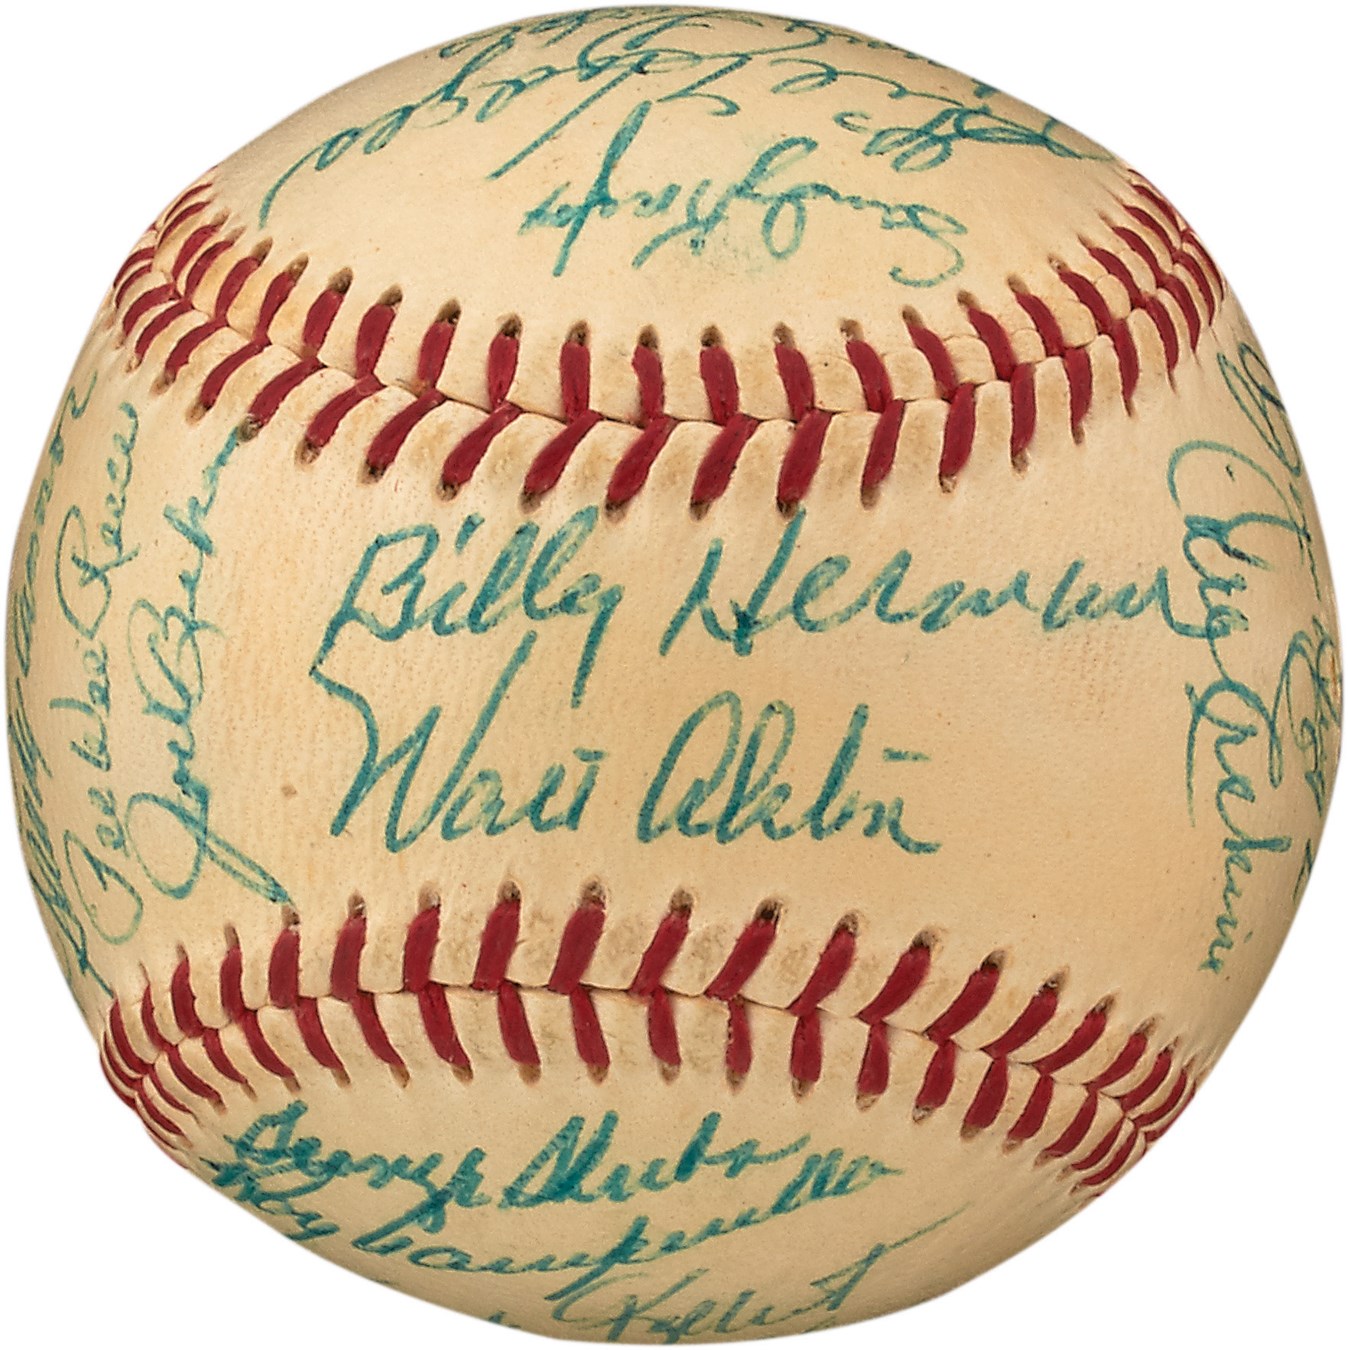 Jackie Robinson & Brooklyn Dodgers - The Finest 1955 Brooklyn Dodgers Team-Signed Baseball Extant (NO Clubhouse Signatures, PSA NM-MT 8)